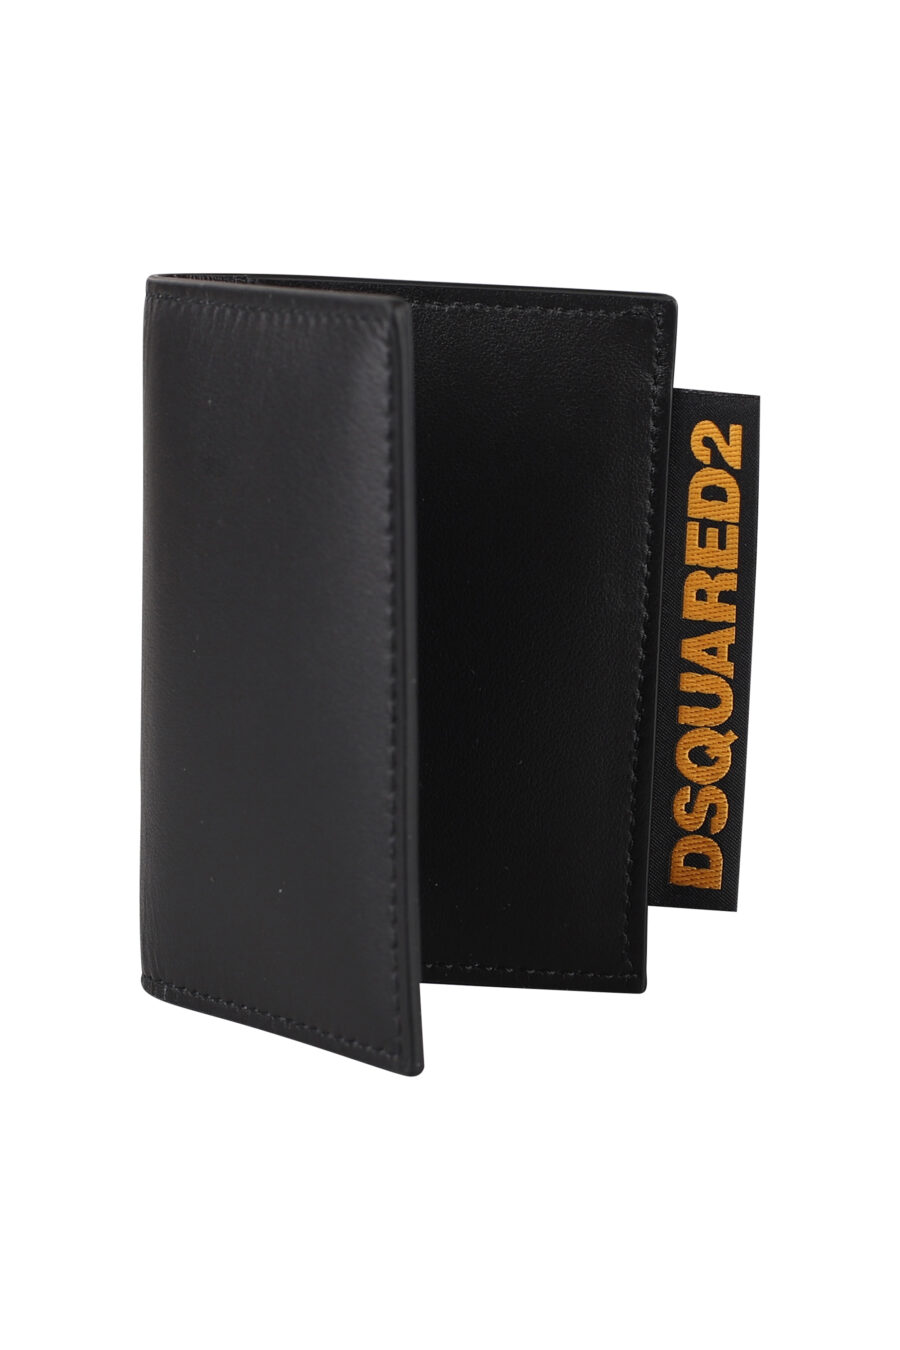 Black card holder with yellow label and logo - IMG 1278